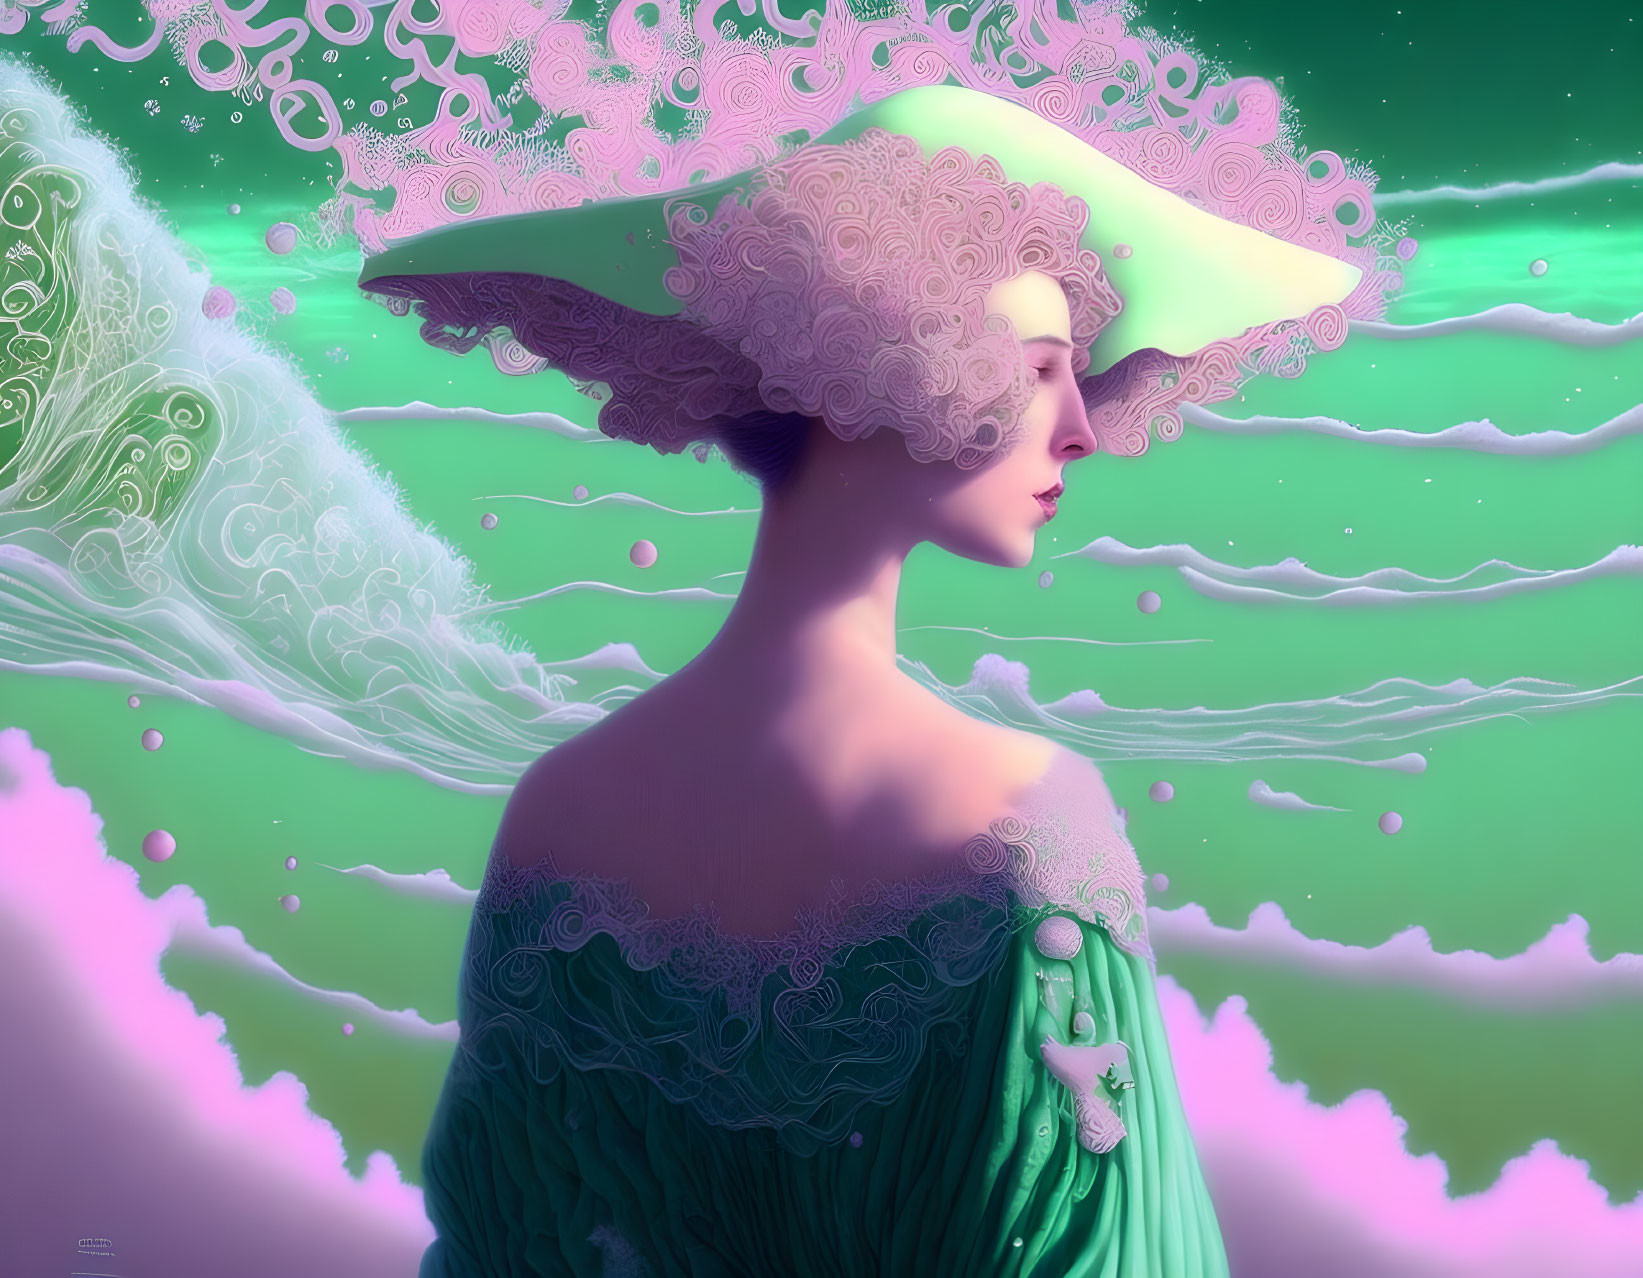 Stylized portrait of woman in green dress and hat against surreal wave patterns